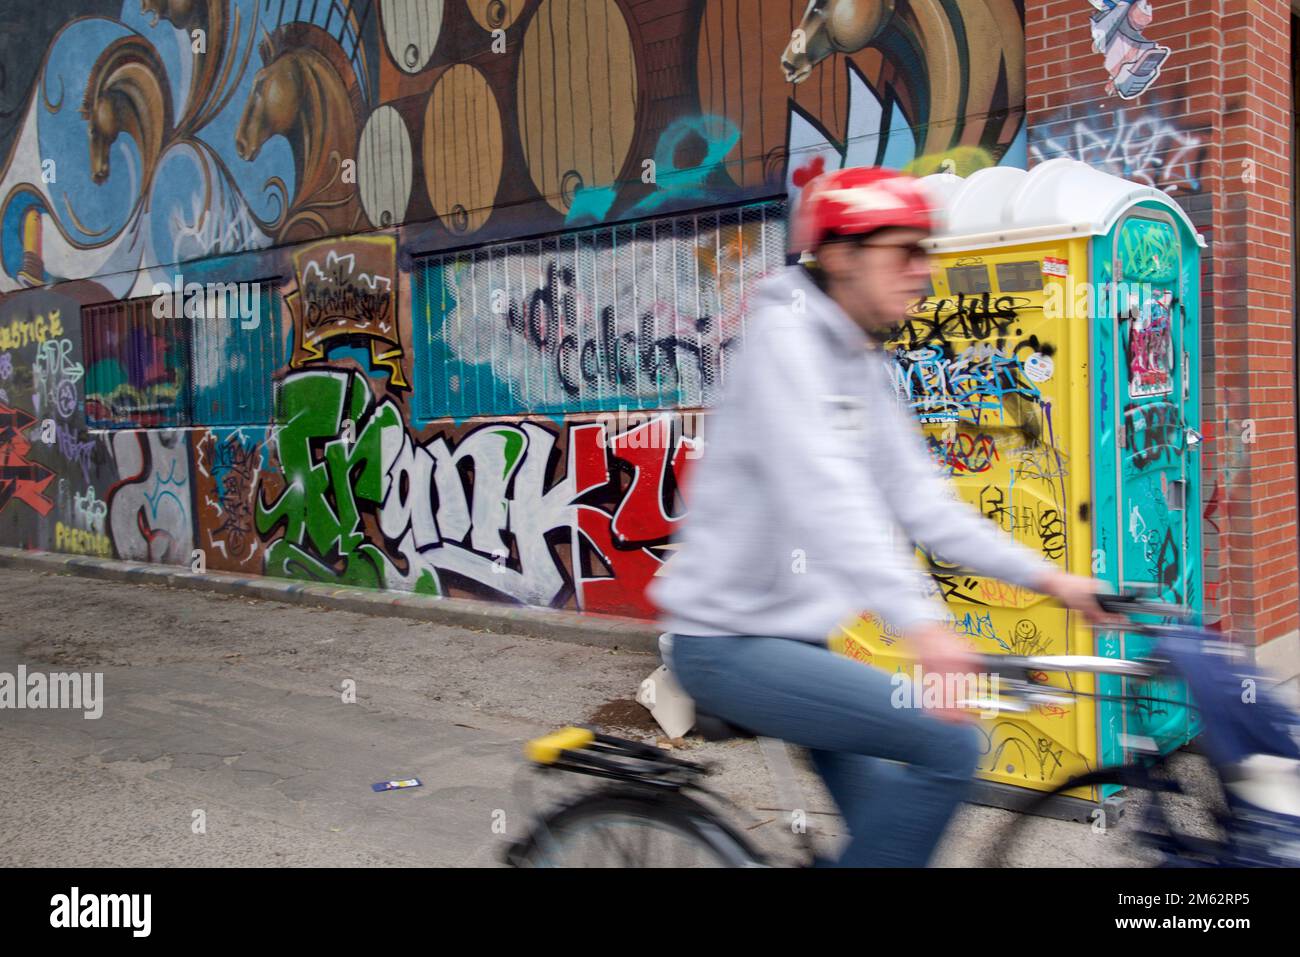 Blurred motion of a man riding a bicycle with the graffiti background. Stock Photo